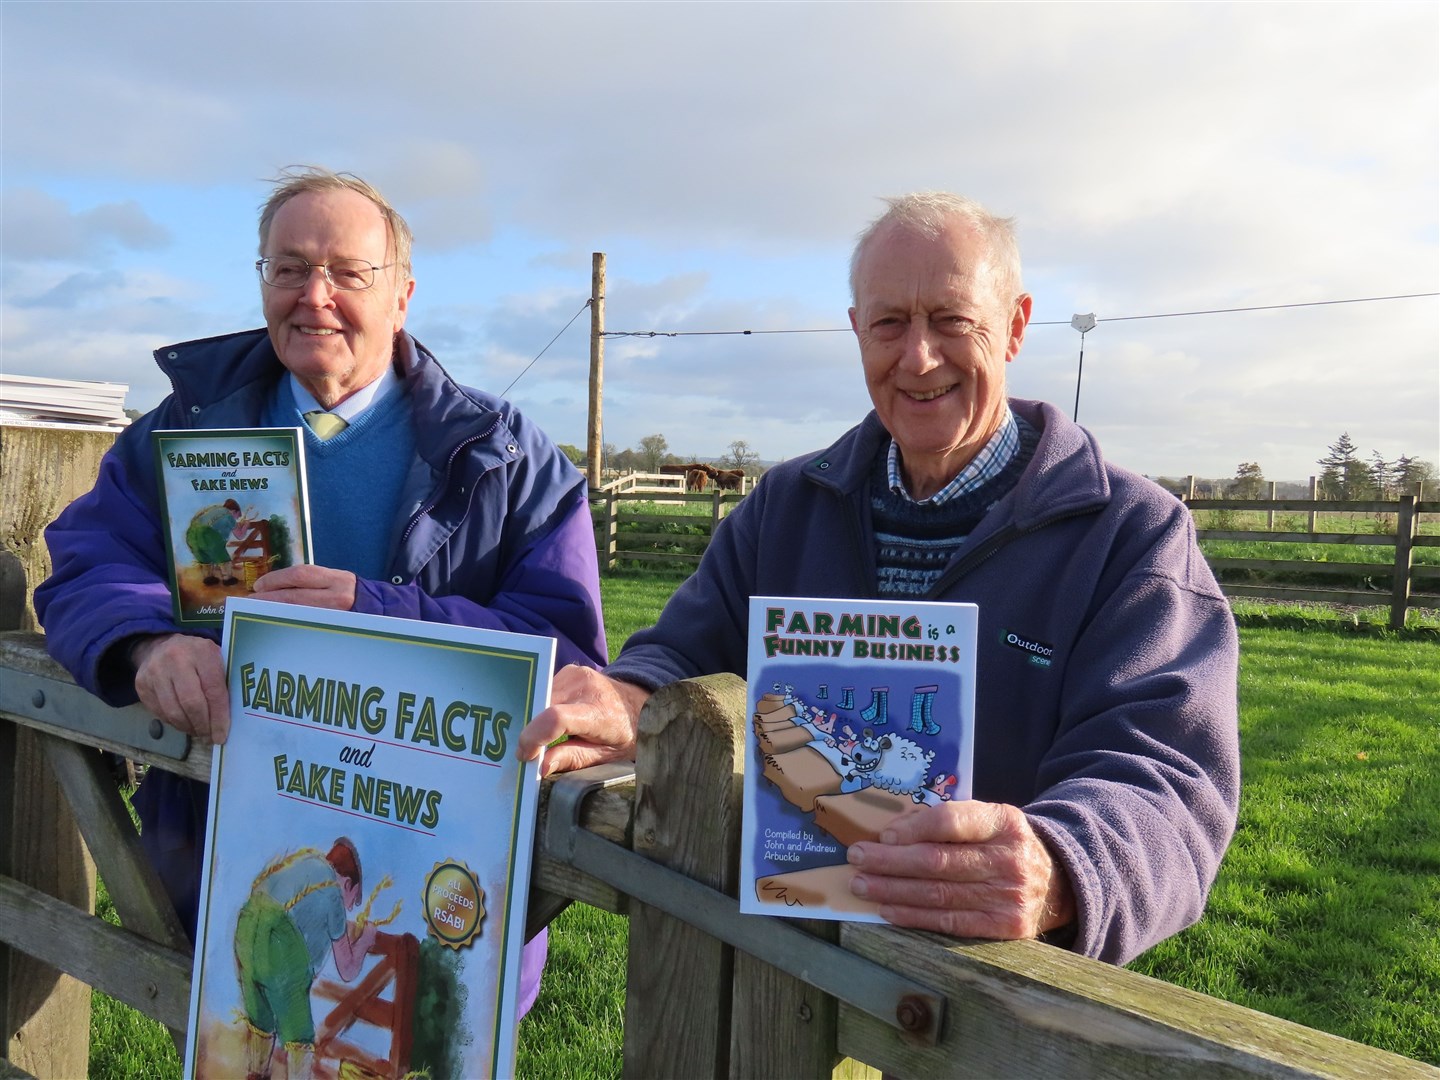 Andrew (left) and John Arbuckle pictured with one of the previous books, which have collectively raised over £72,000 for RSABI. It's hoped the new book will take that total to over £100,0000.